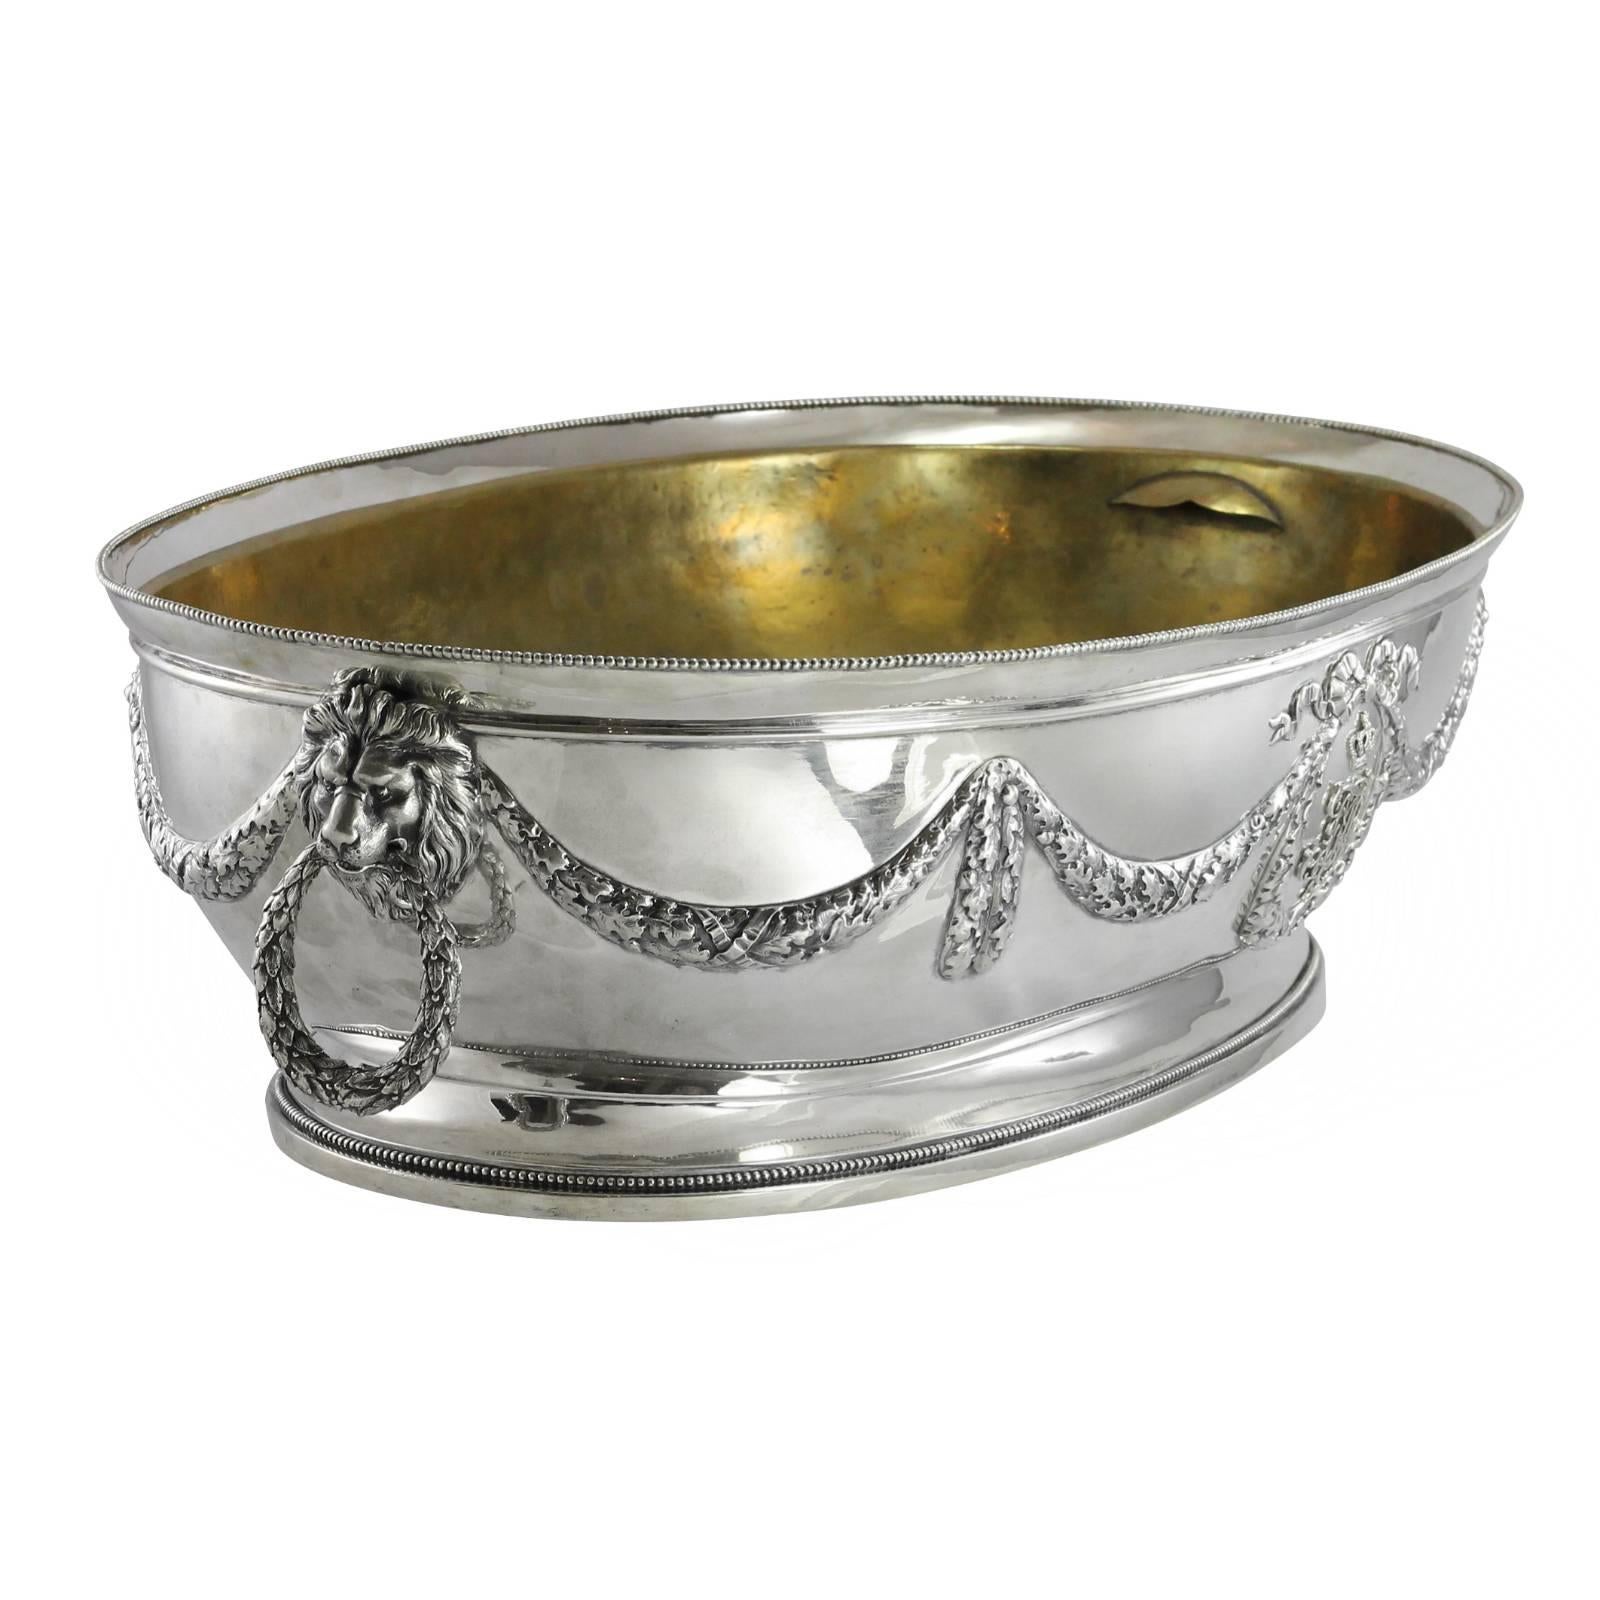 Early 20th Century German Continental Silver Presentation Wine Cooler For Sale 4